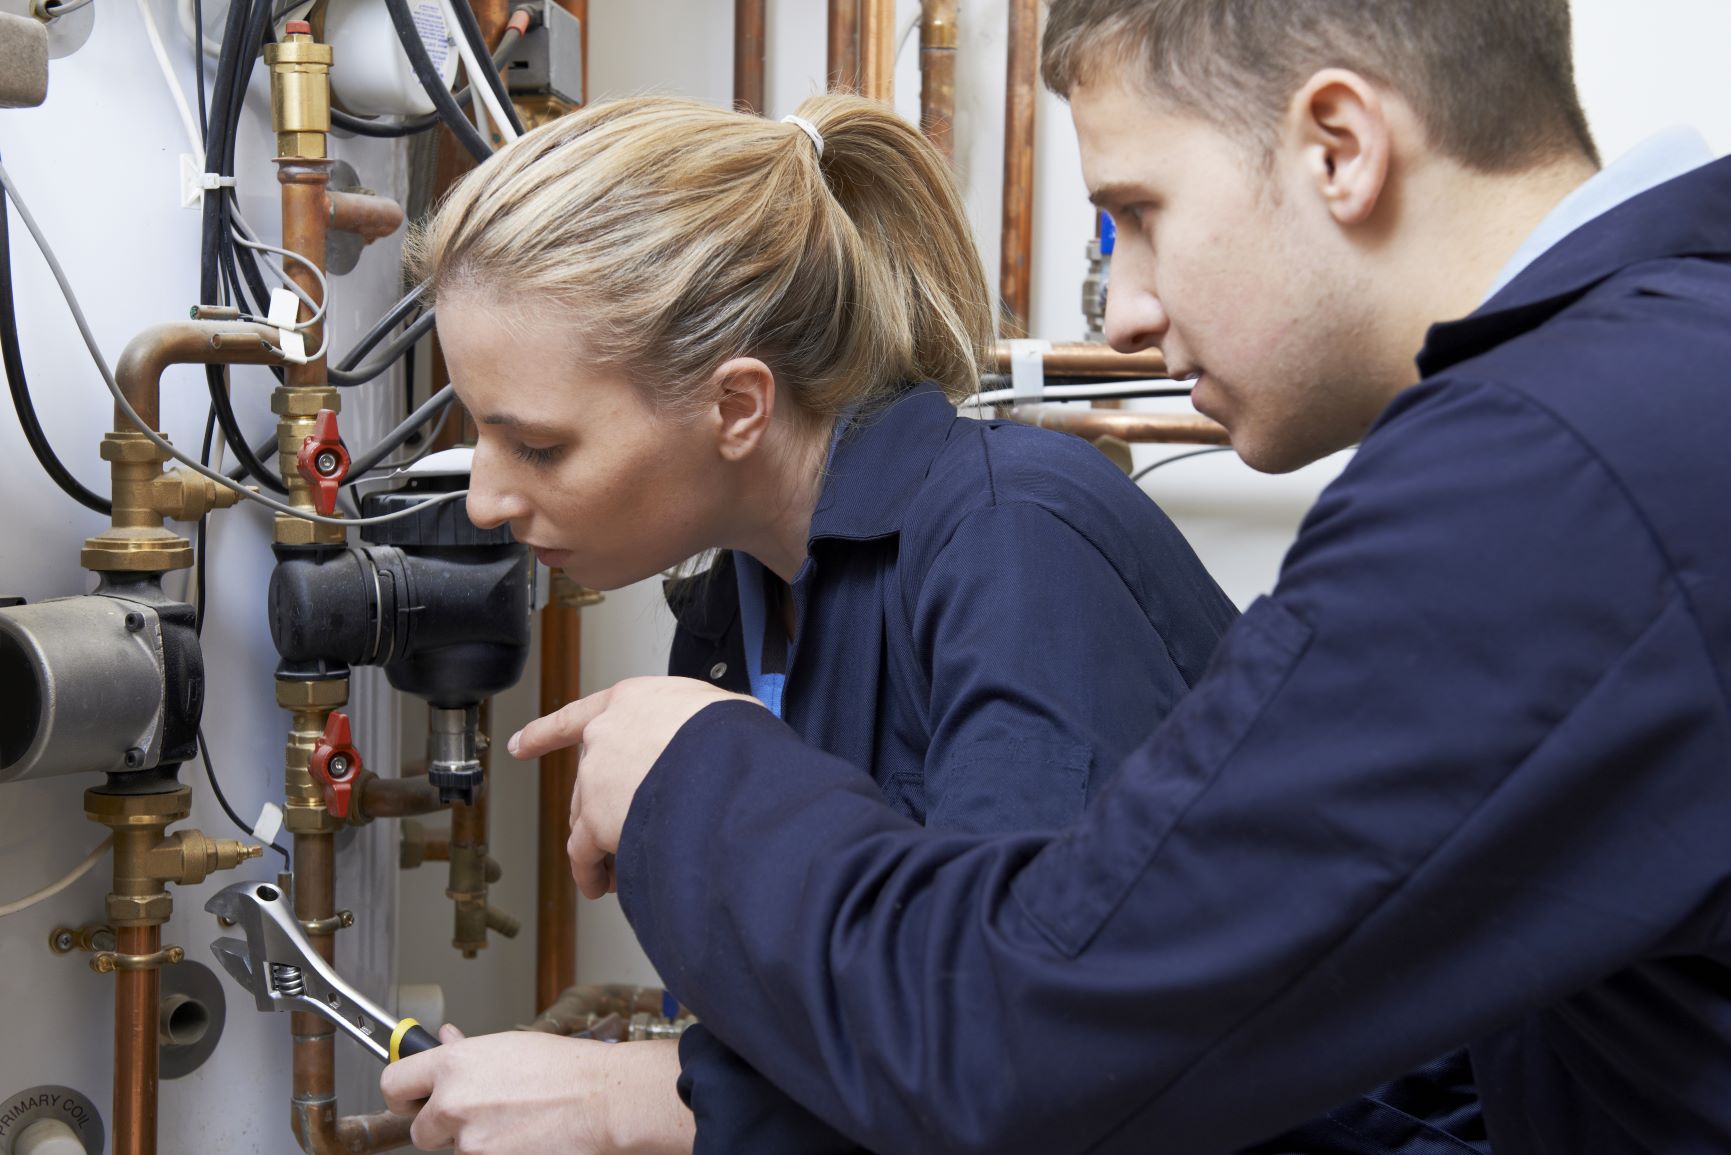 Plumbing and heating companies urged to seize Apprentice Employer Grant opportunity